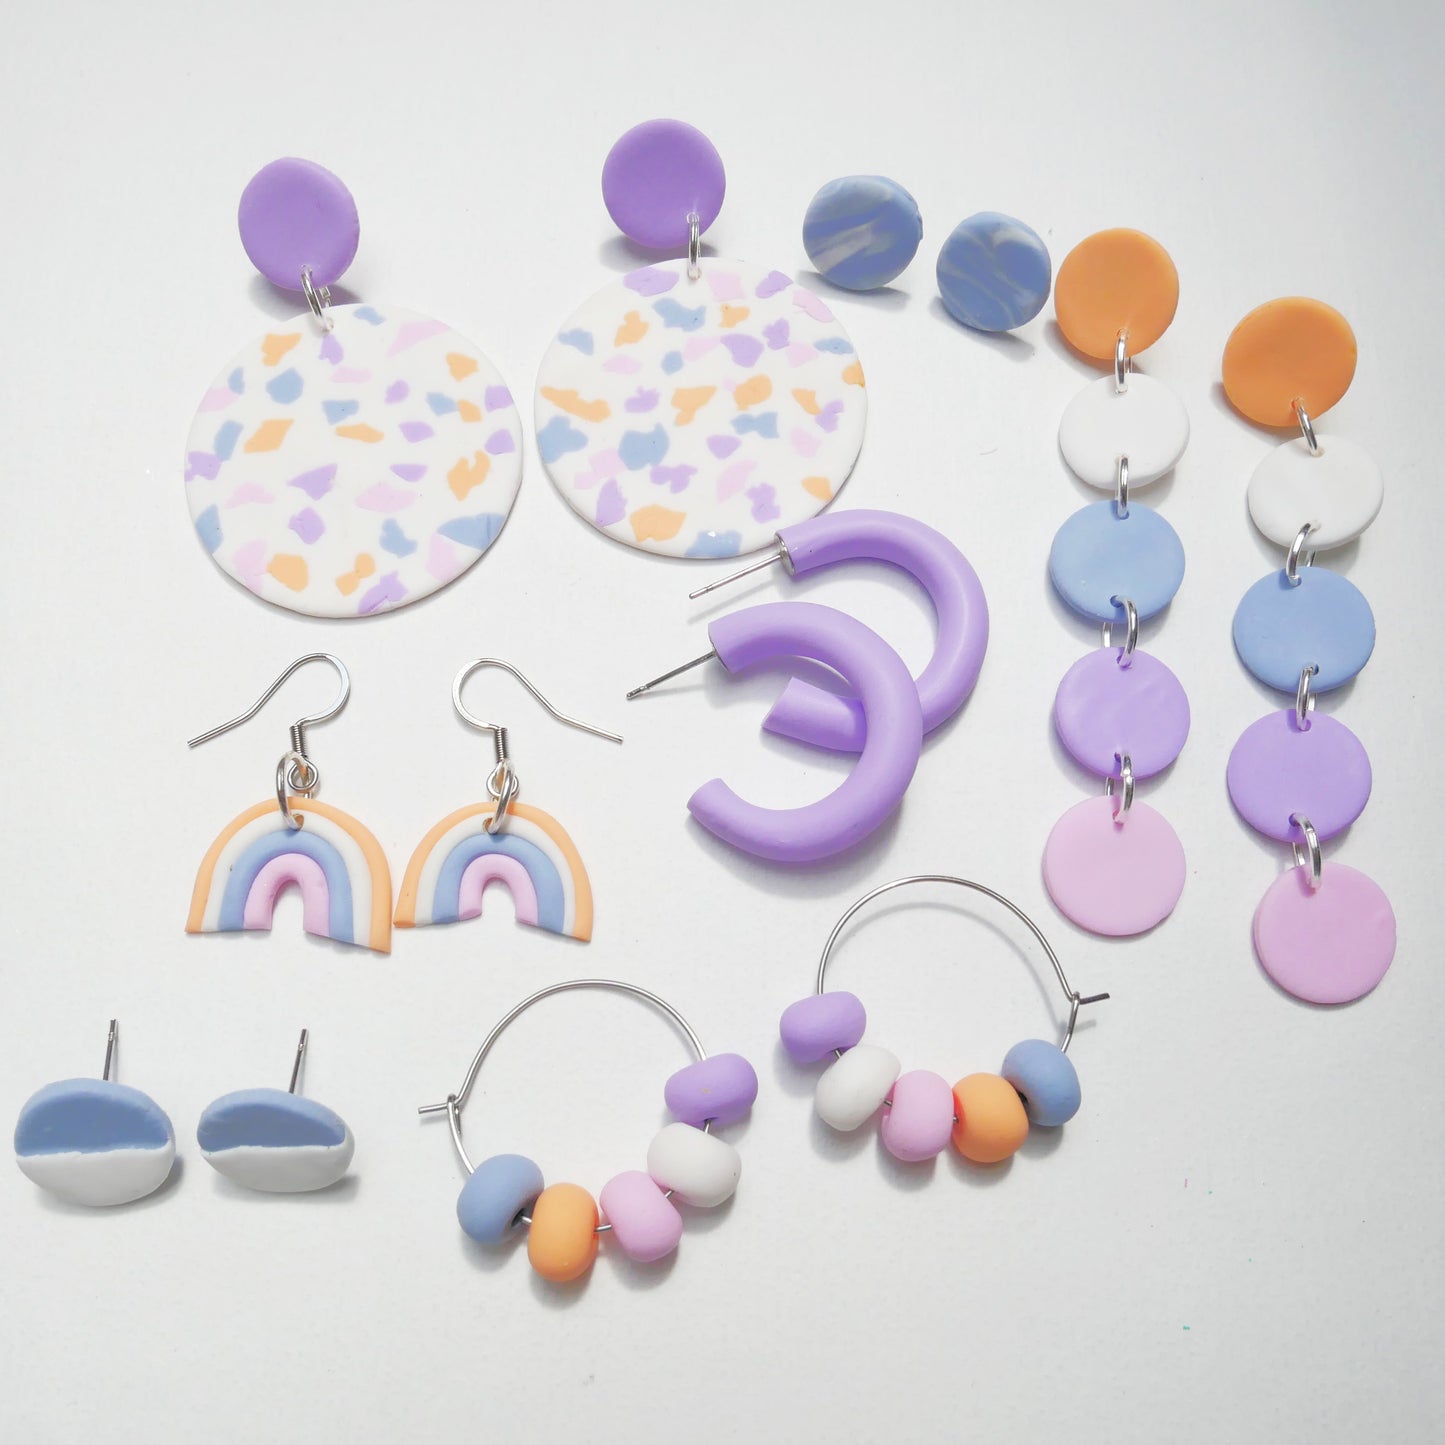 Create, Bake and Make Polymer Clay Earrings Kit - Pastels